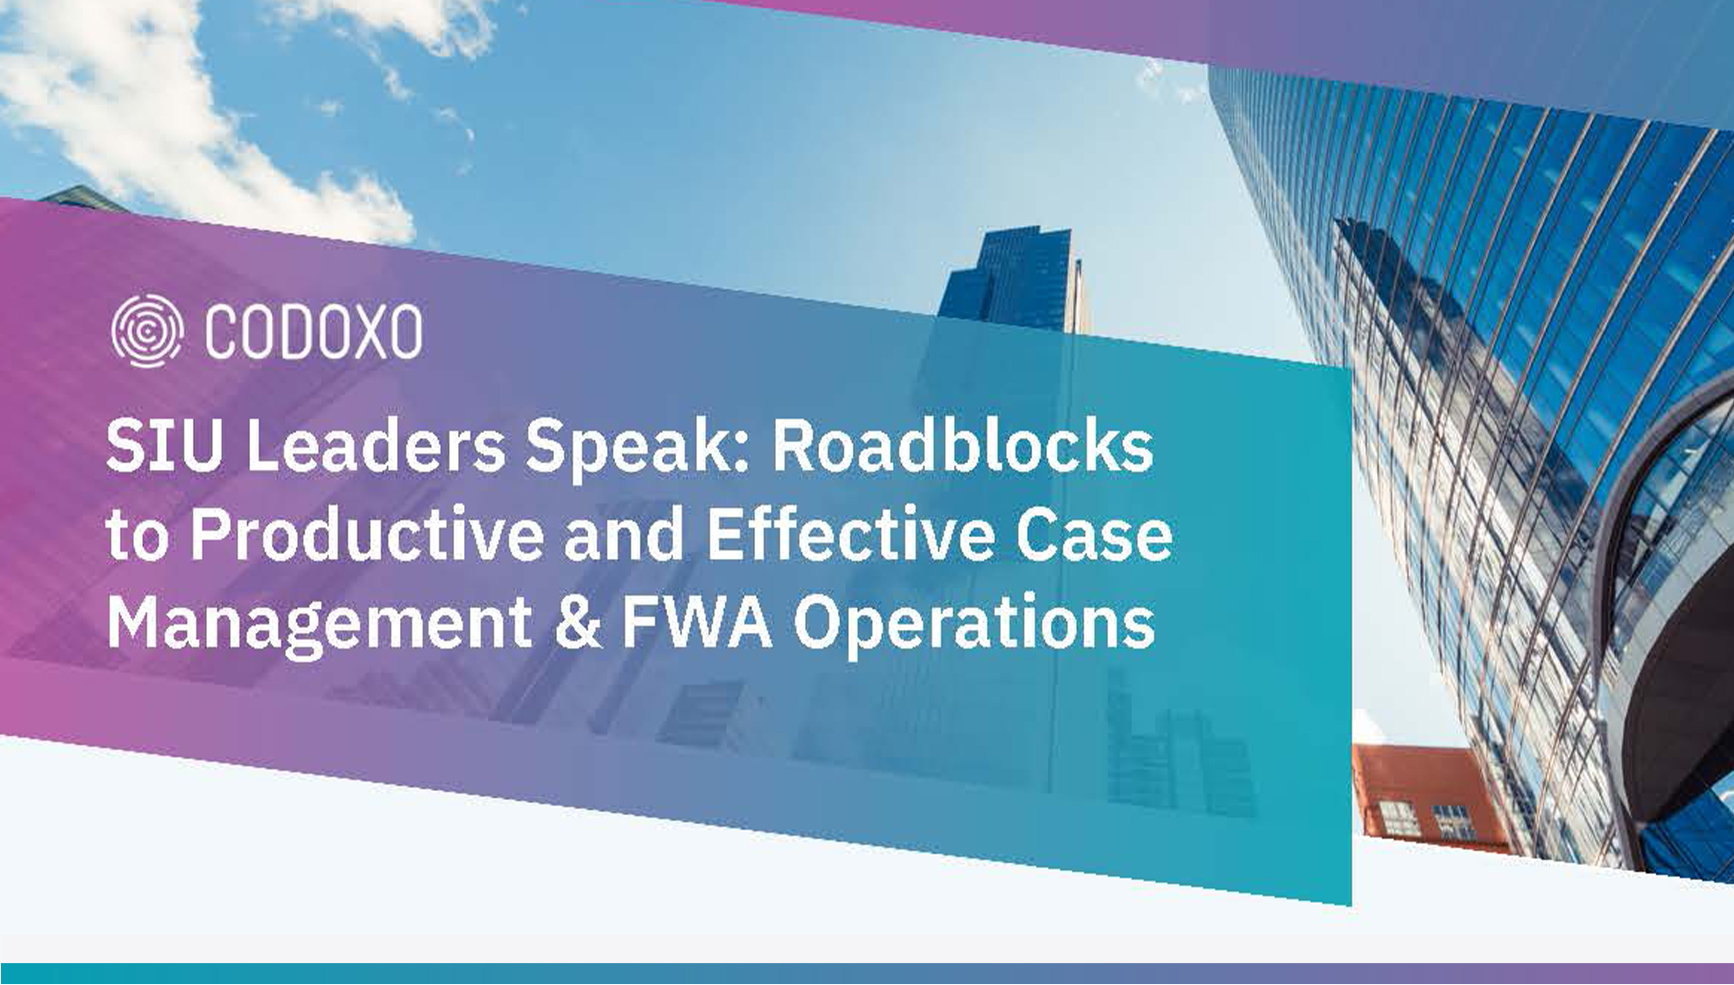 SIU Leaders Speak: Roadblocks to Productive and Effective Case Management & FWA Operations